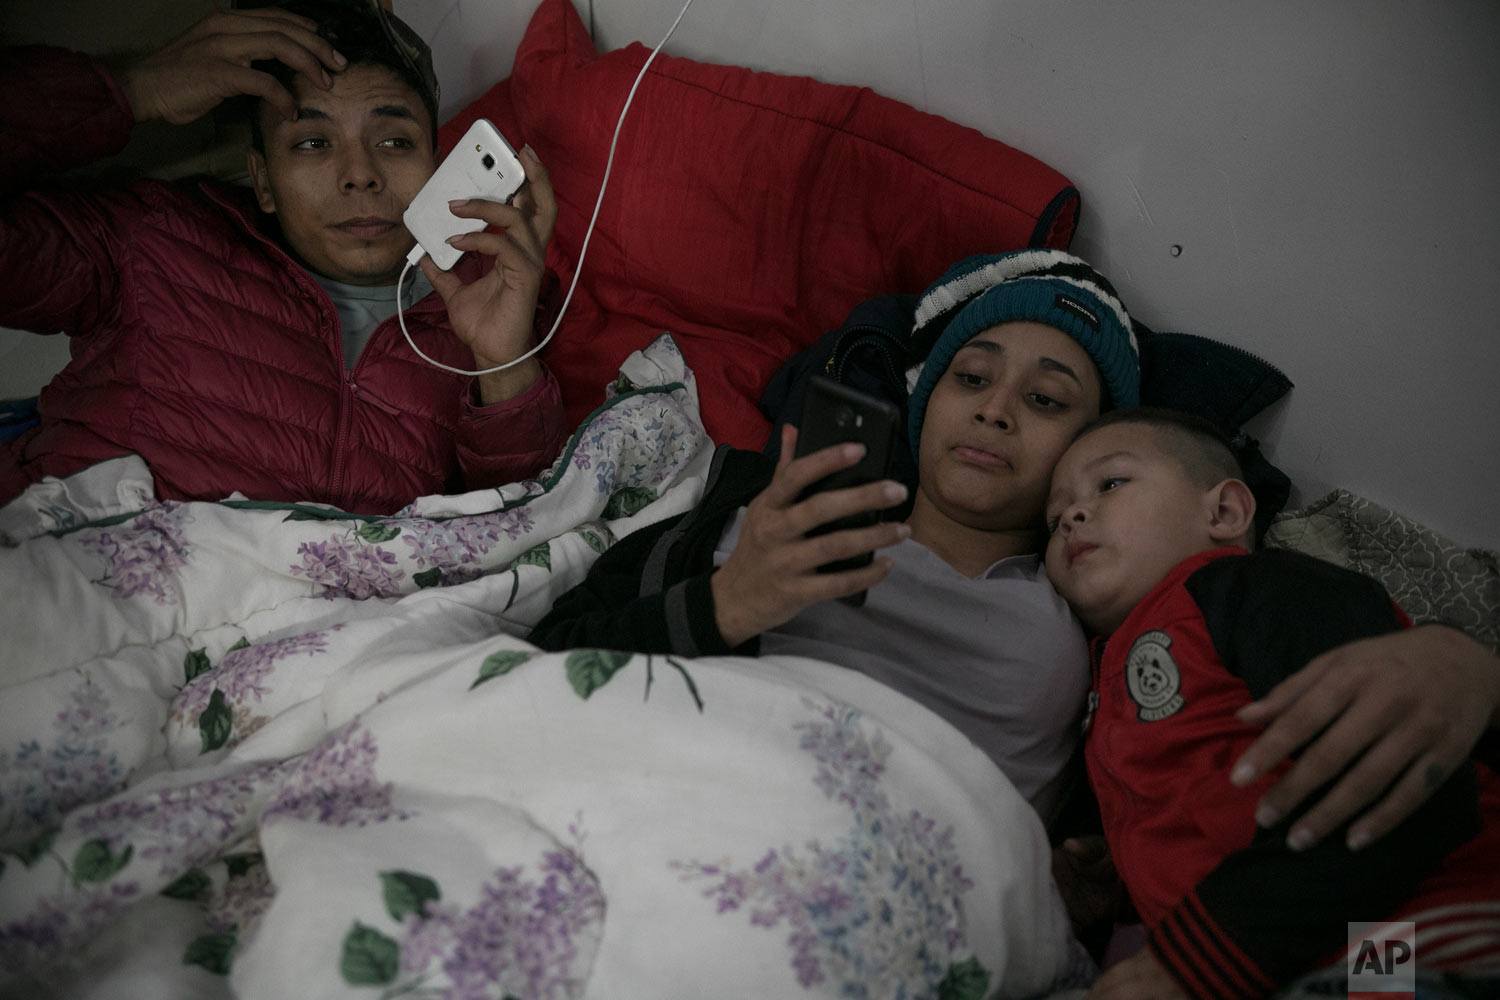  Teen Honduran migrants Josue Mejia Lucero, his girlfriend Milagro de Jesus Henriquez Ayala, 15, and Josue's 3-year-old nephew Jefferson, look at cell phones as they lie in bed at the Agape World Mission shelter in Tijuana, Mexico, Feb. 8, 2019. (AP 